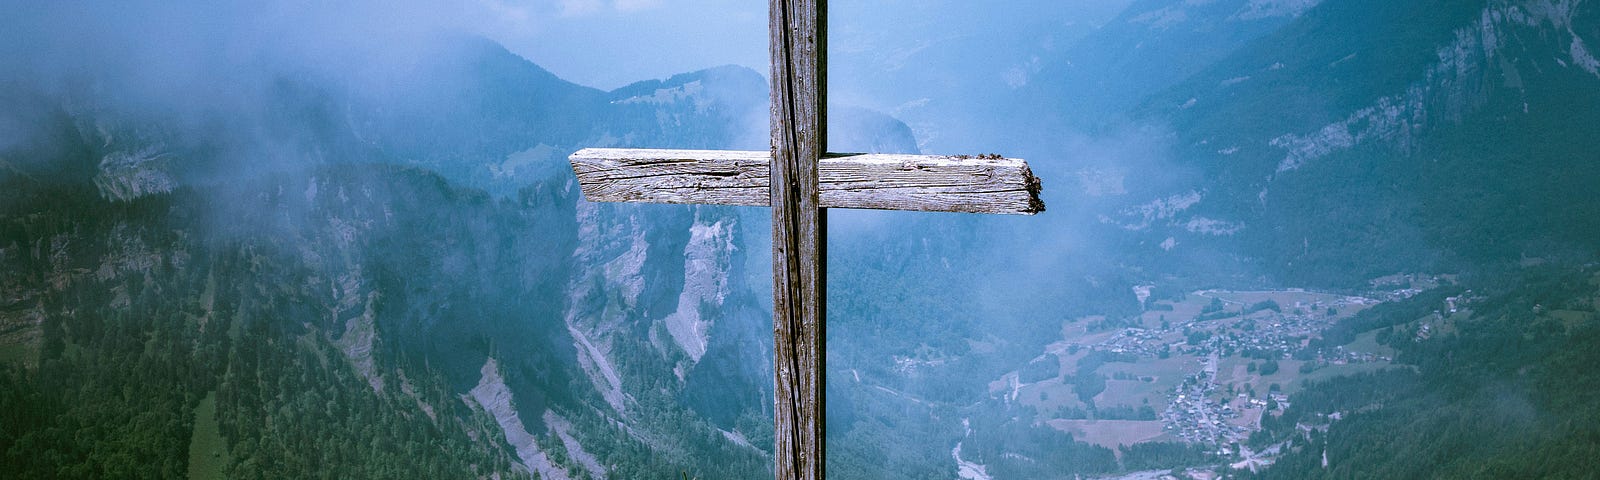 The cross of Christ above the mountain.